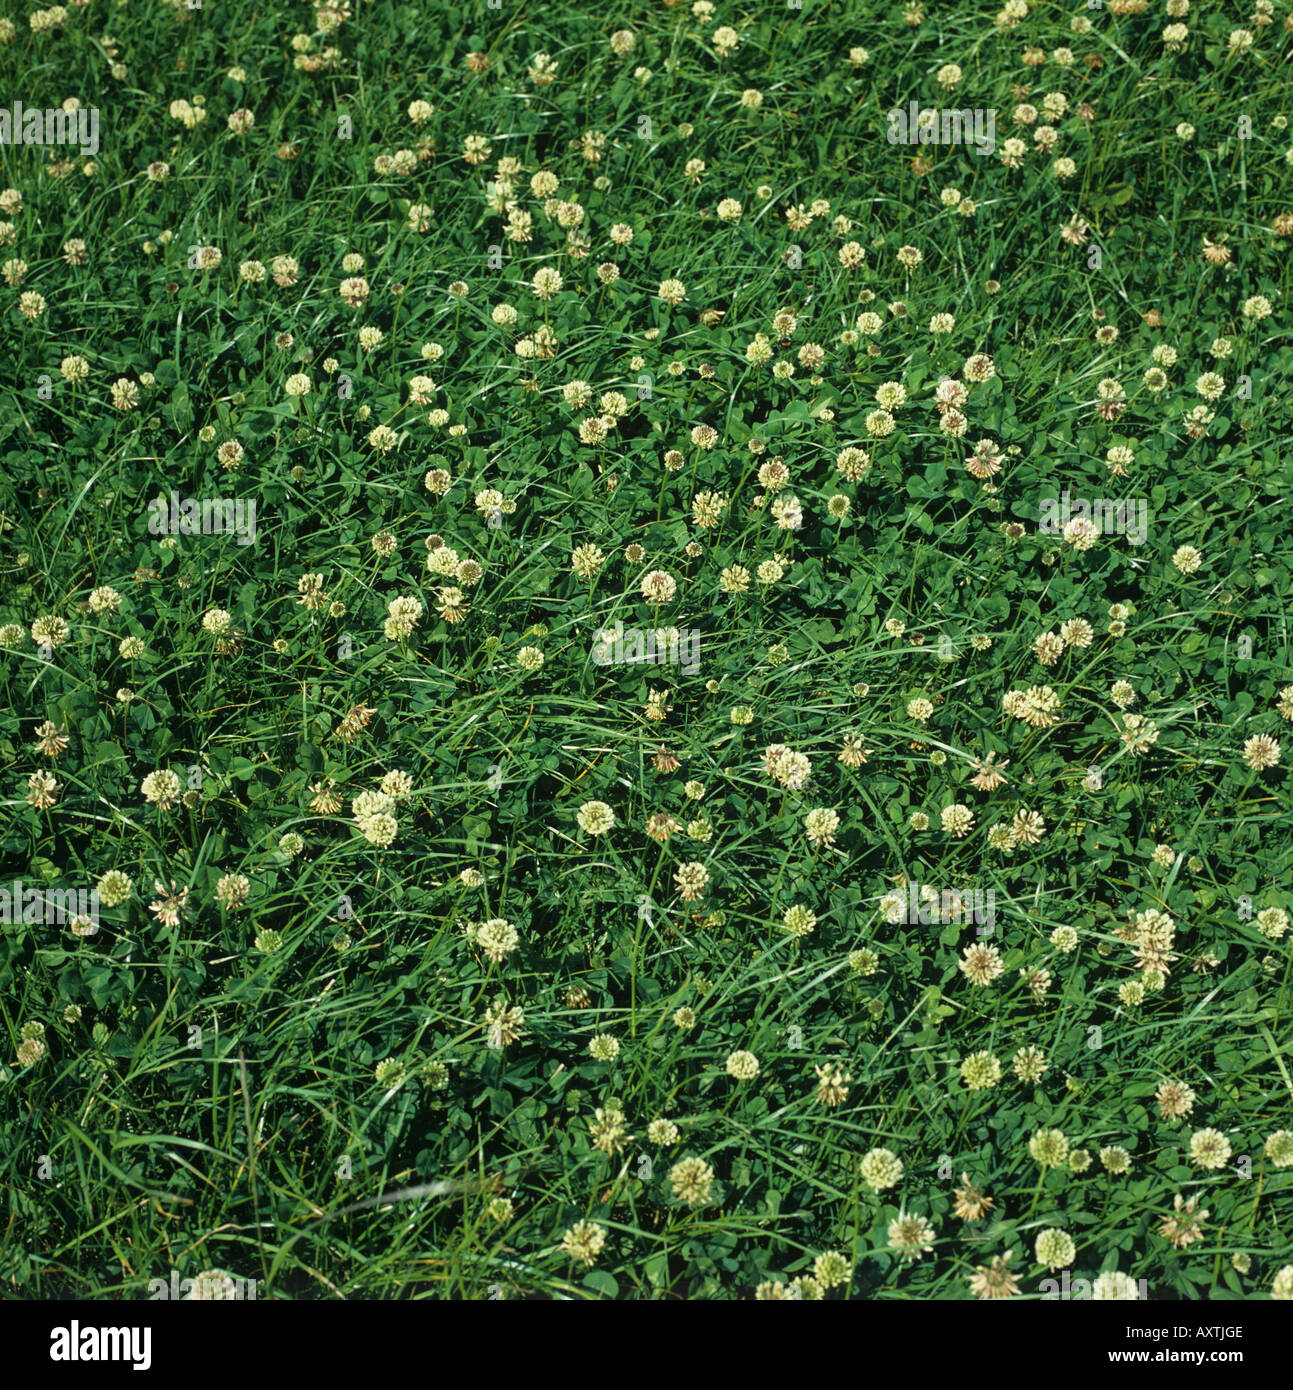 White clover flowering in a grass ley clover mixture Stock Photo